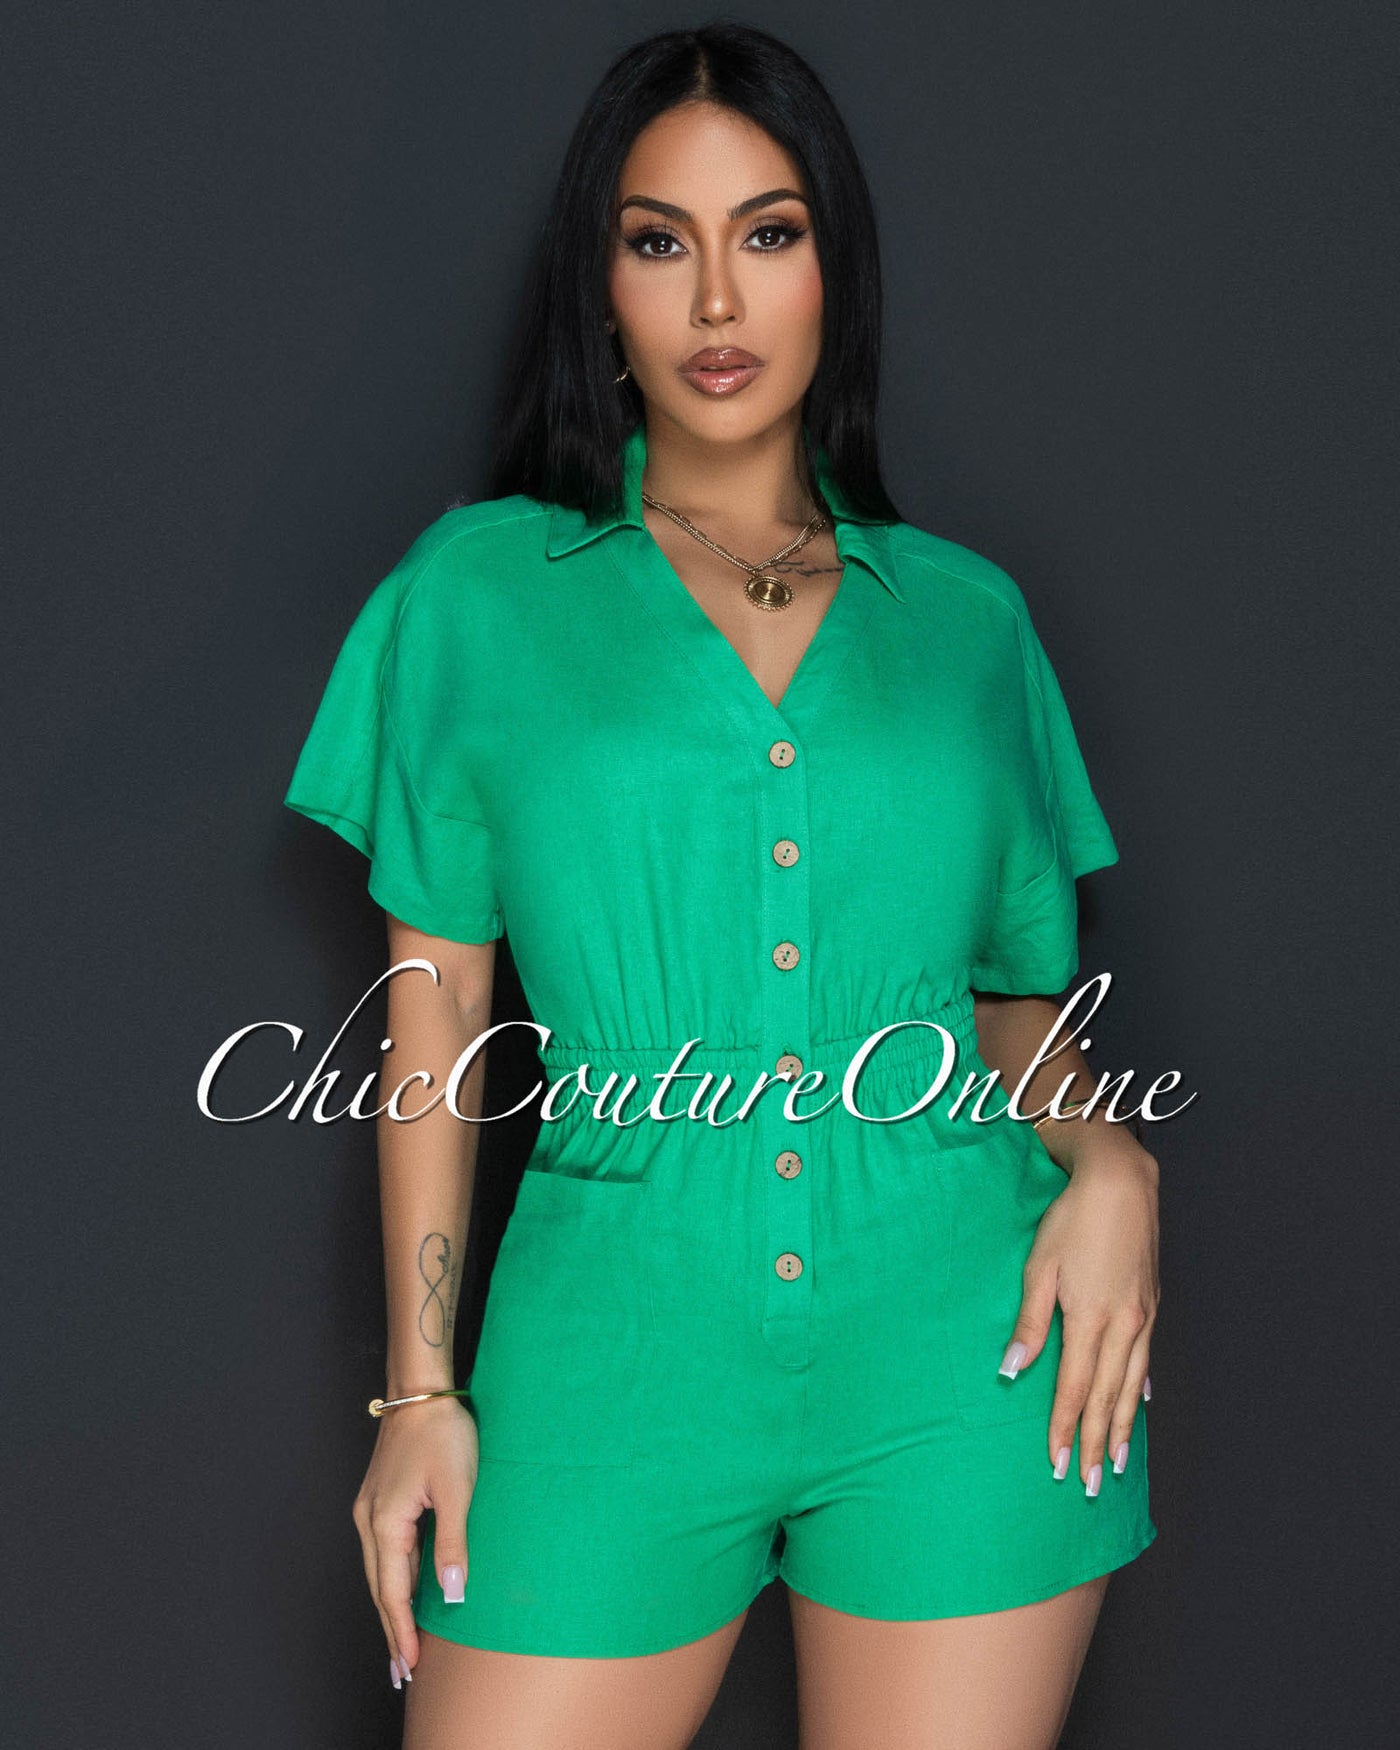 Cora Kelly Green Front Buttons Linen Utility Romper